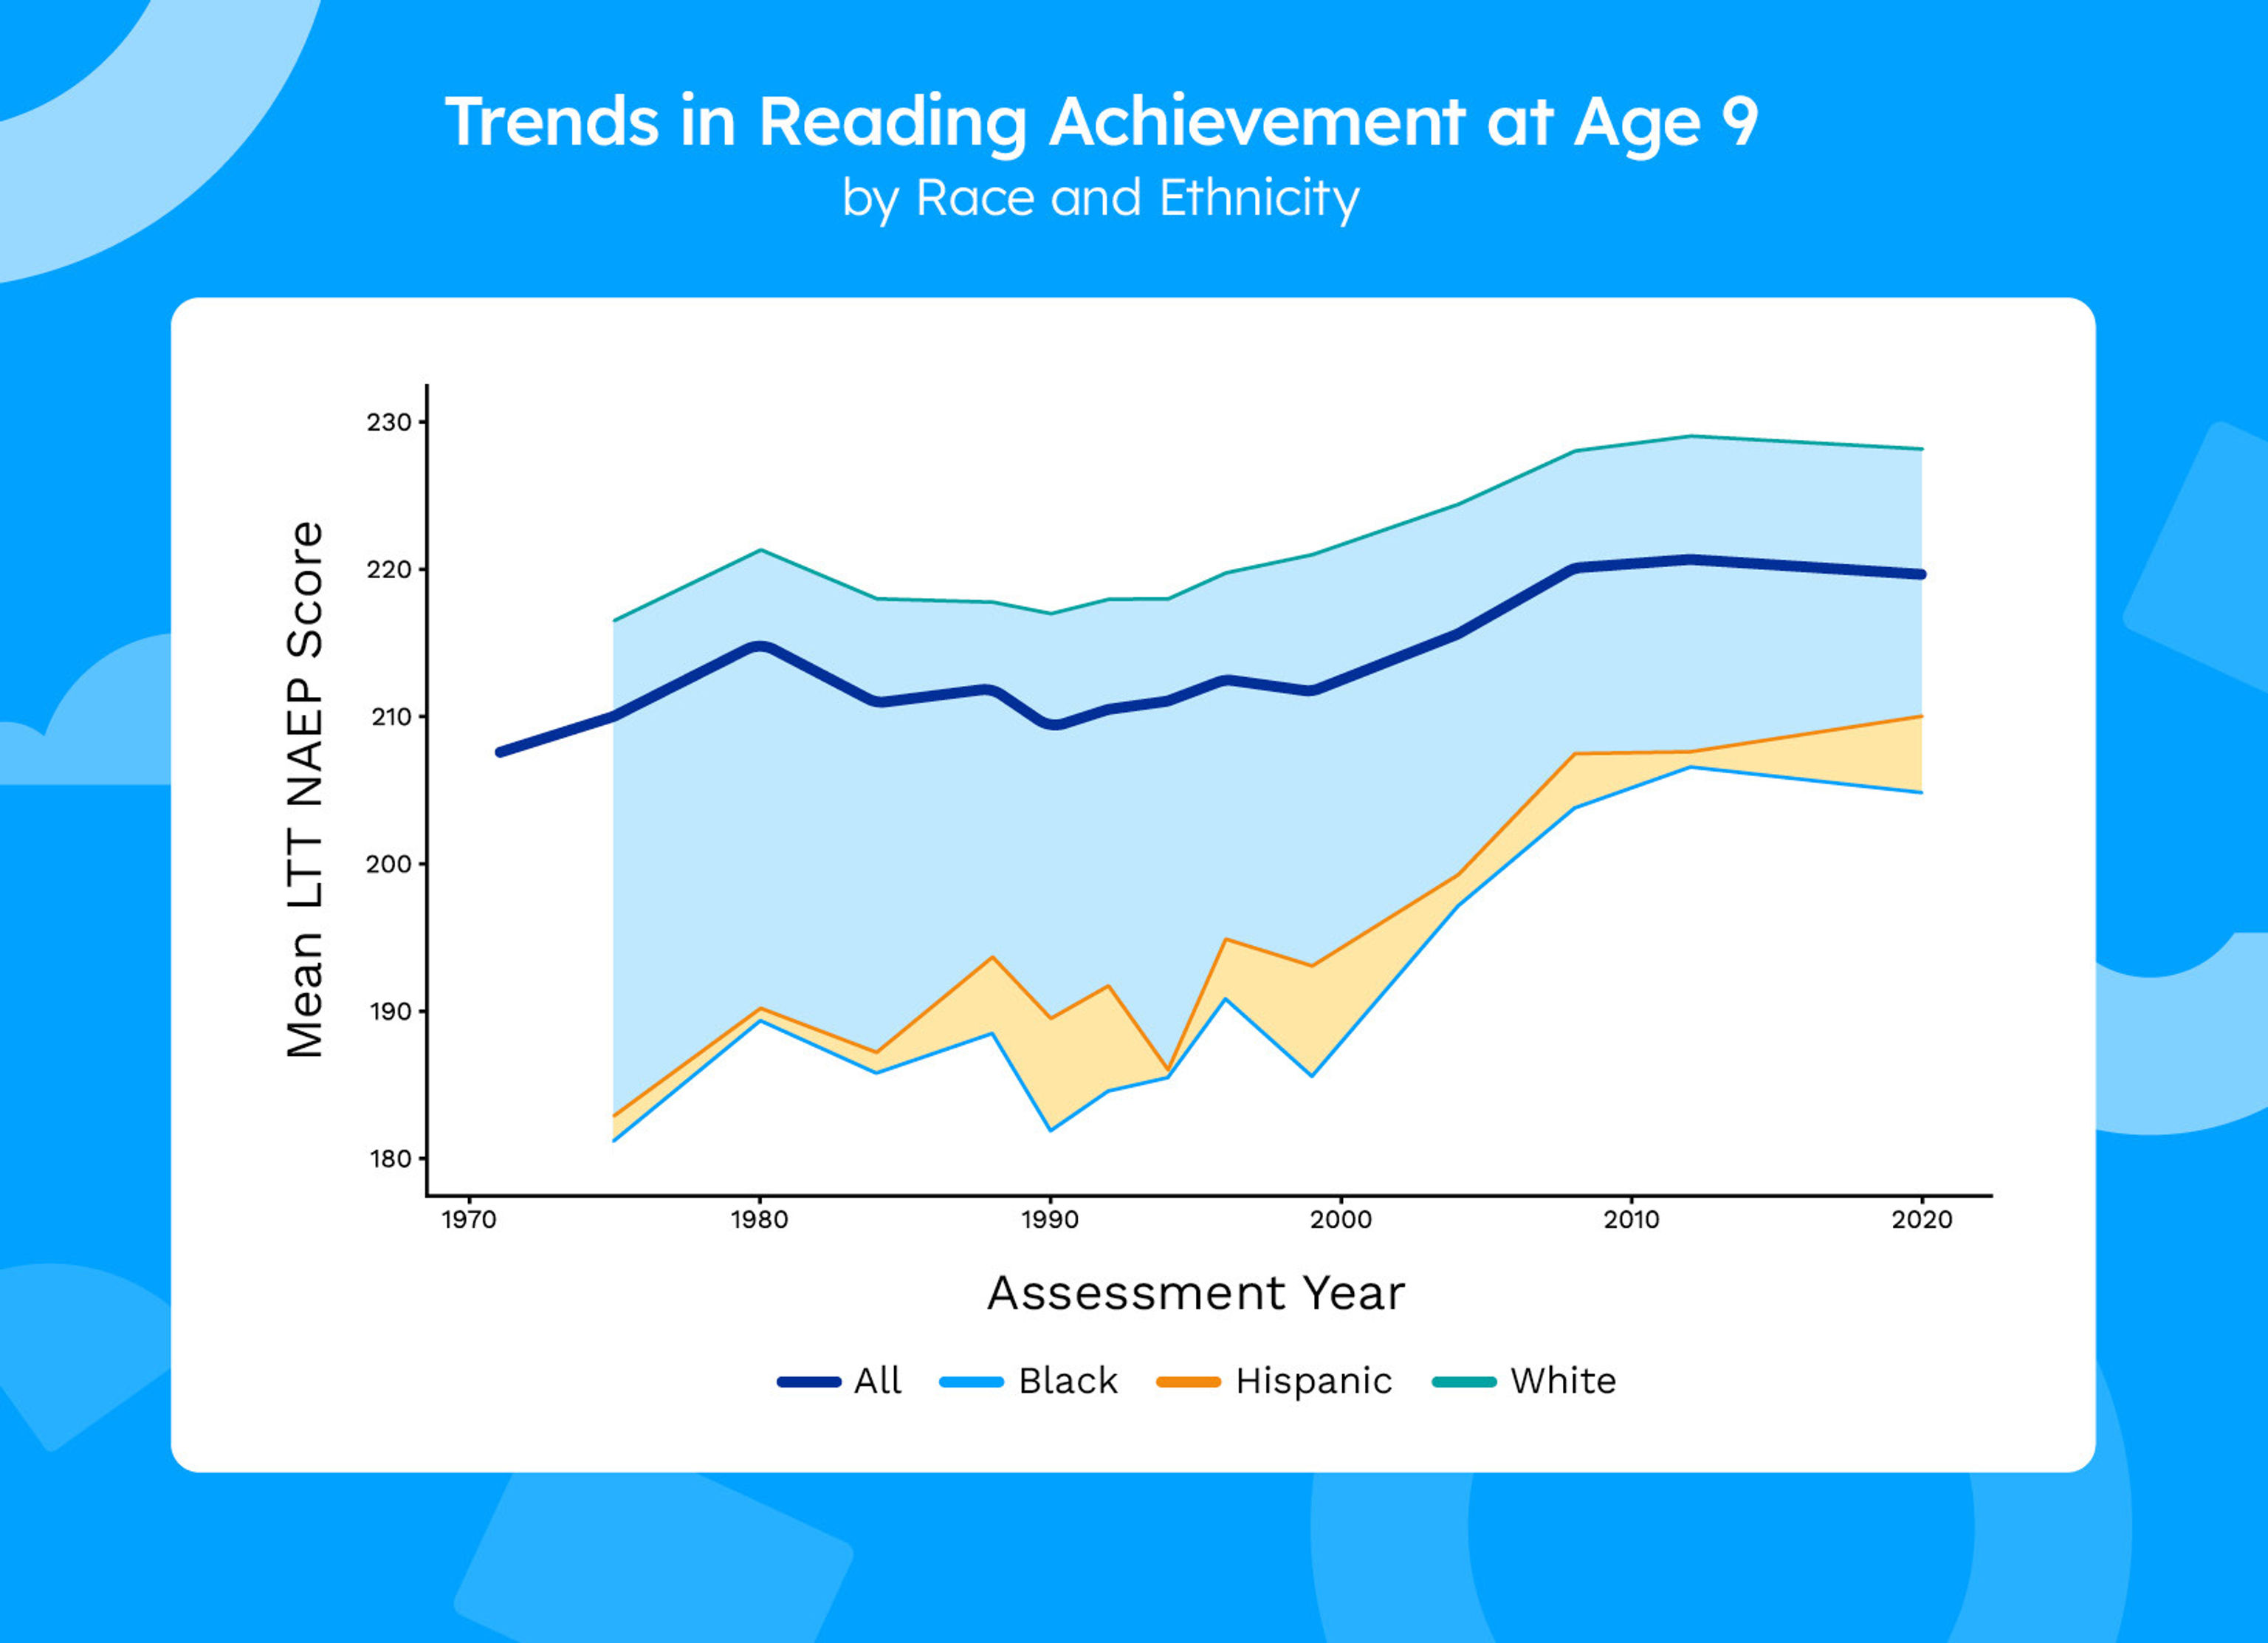 A graph showing the trends of reading achievement at age 9 by race and ethnicity